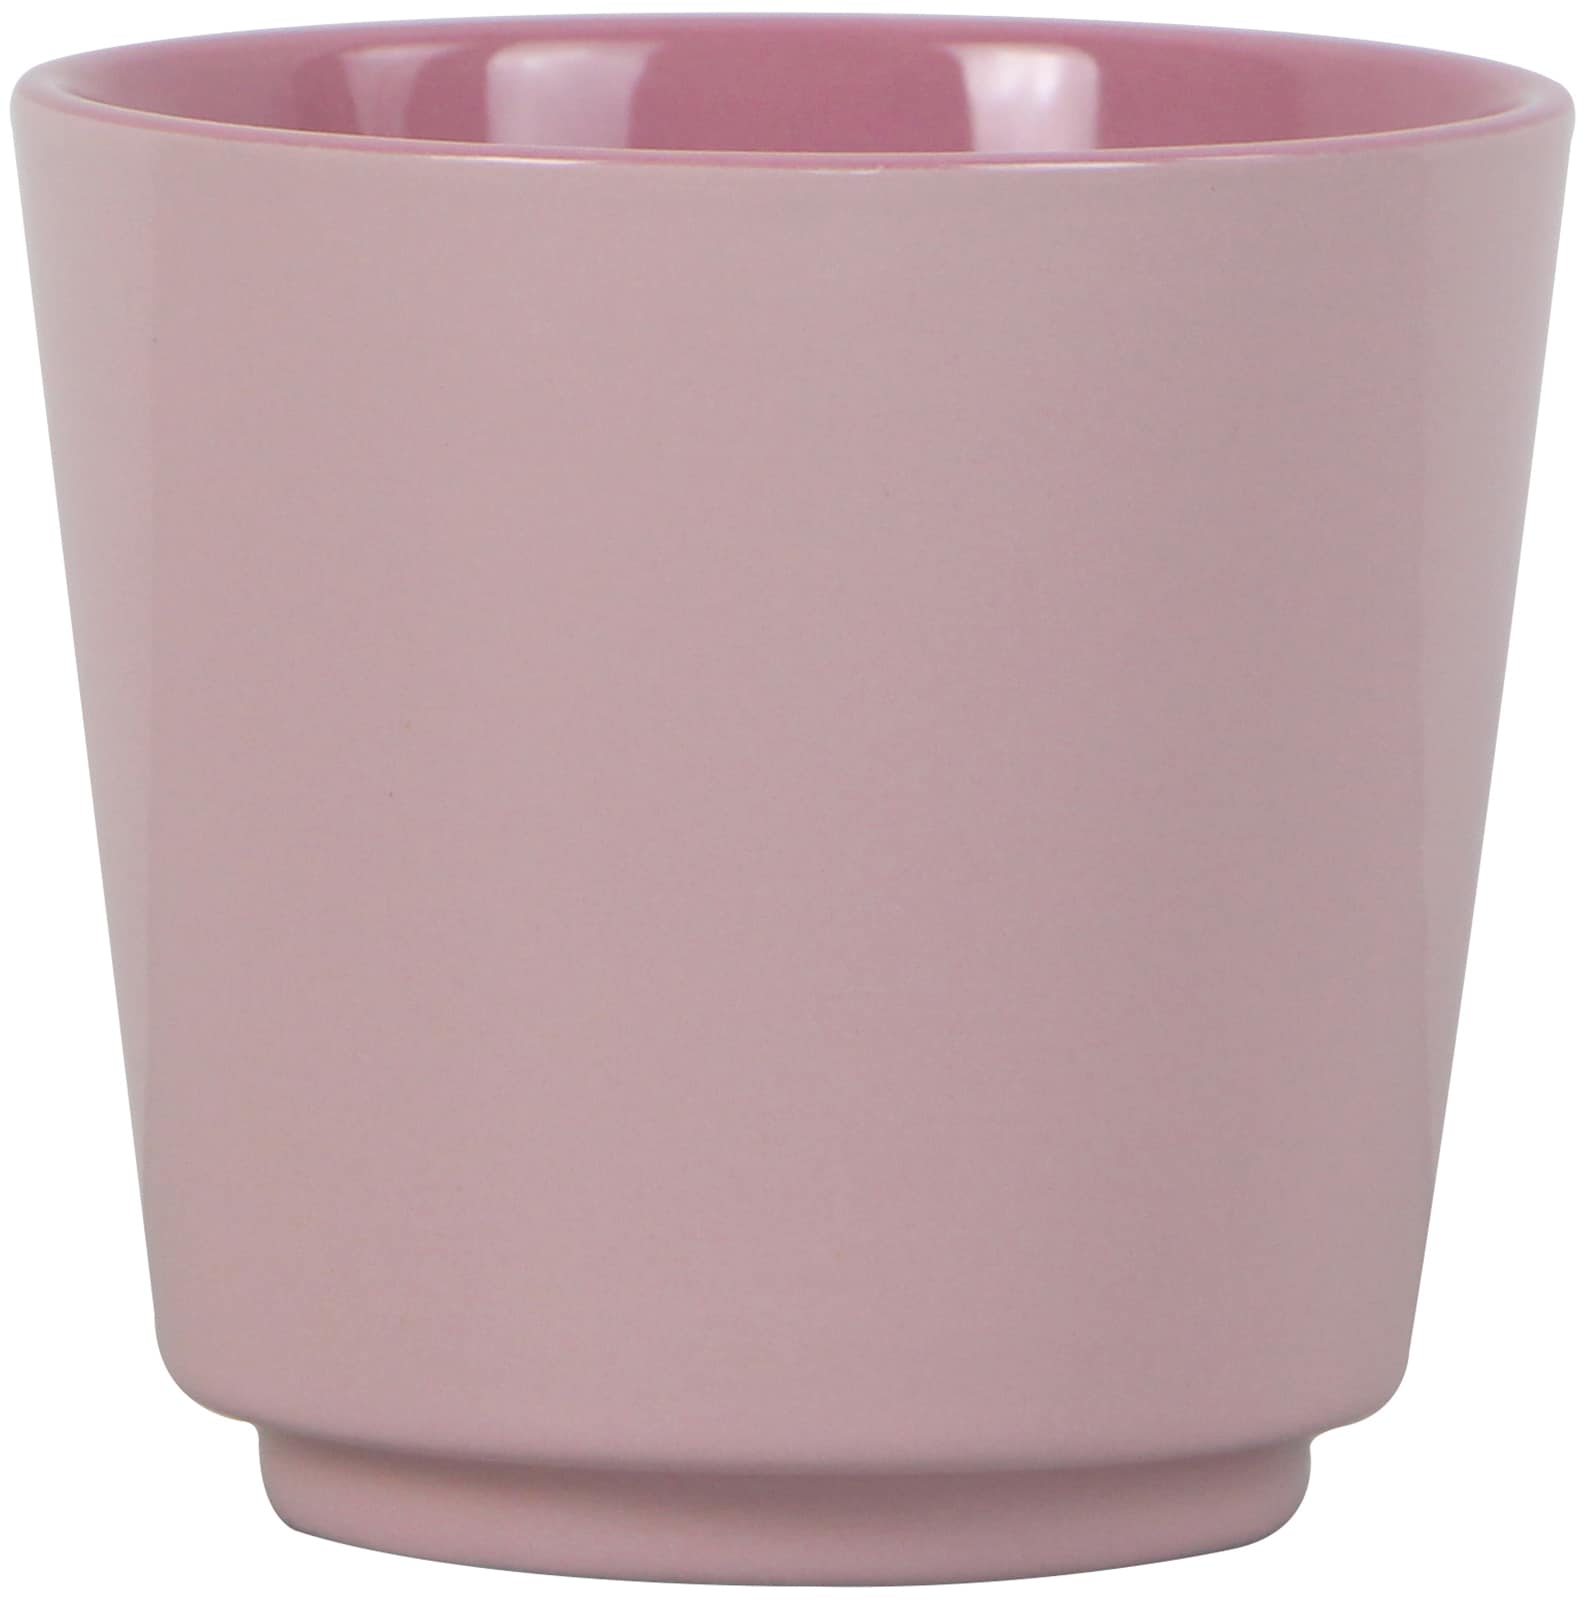 allen + roth 4.13-in W x 3.74-in H Pink Ceramic Indoor Planter in the Pots  & Planters department at